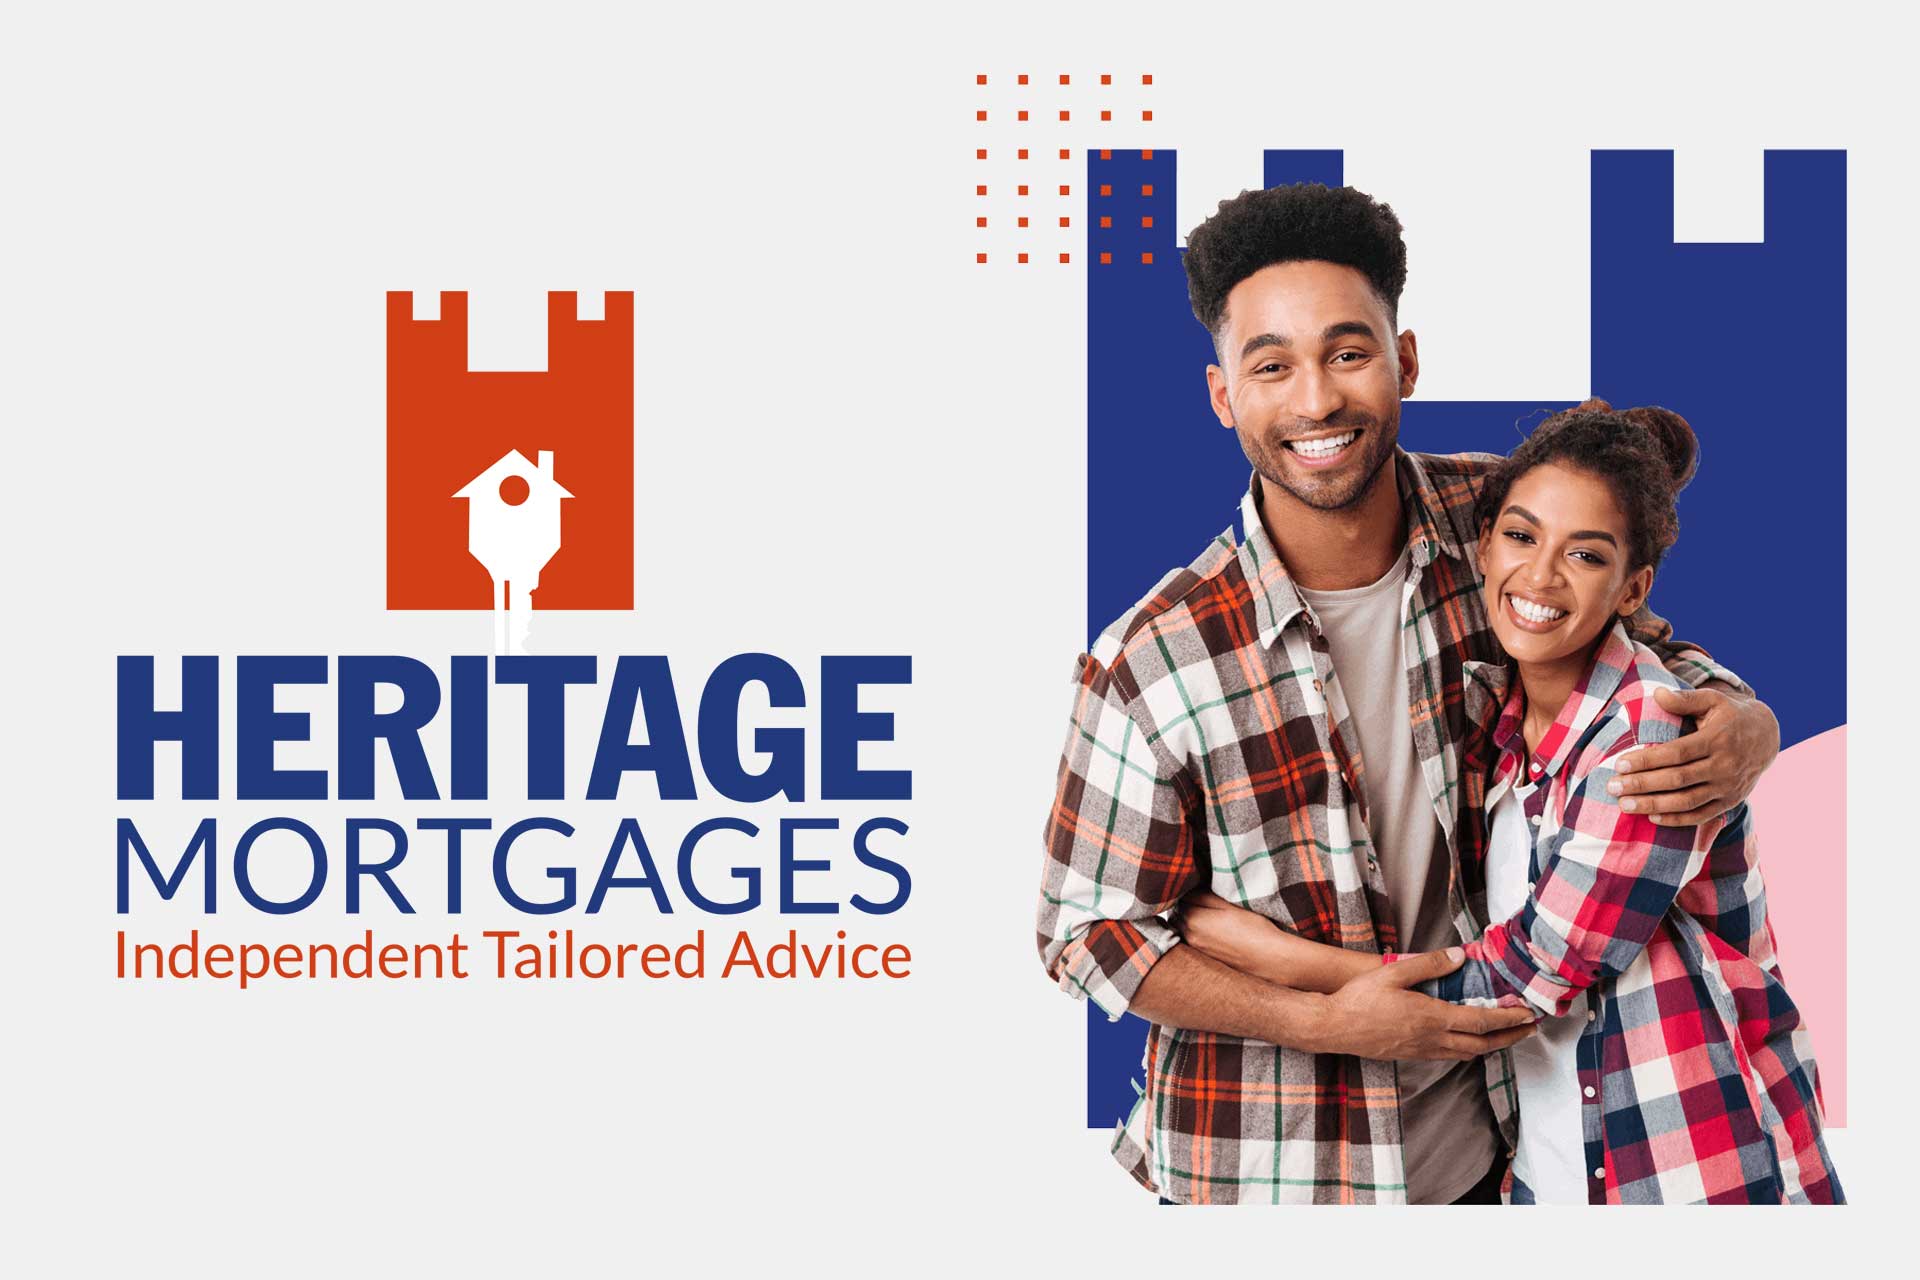 Heritage Mortgages Brand Identity